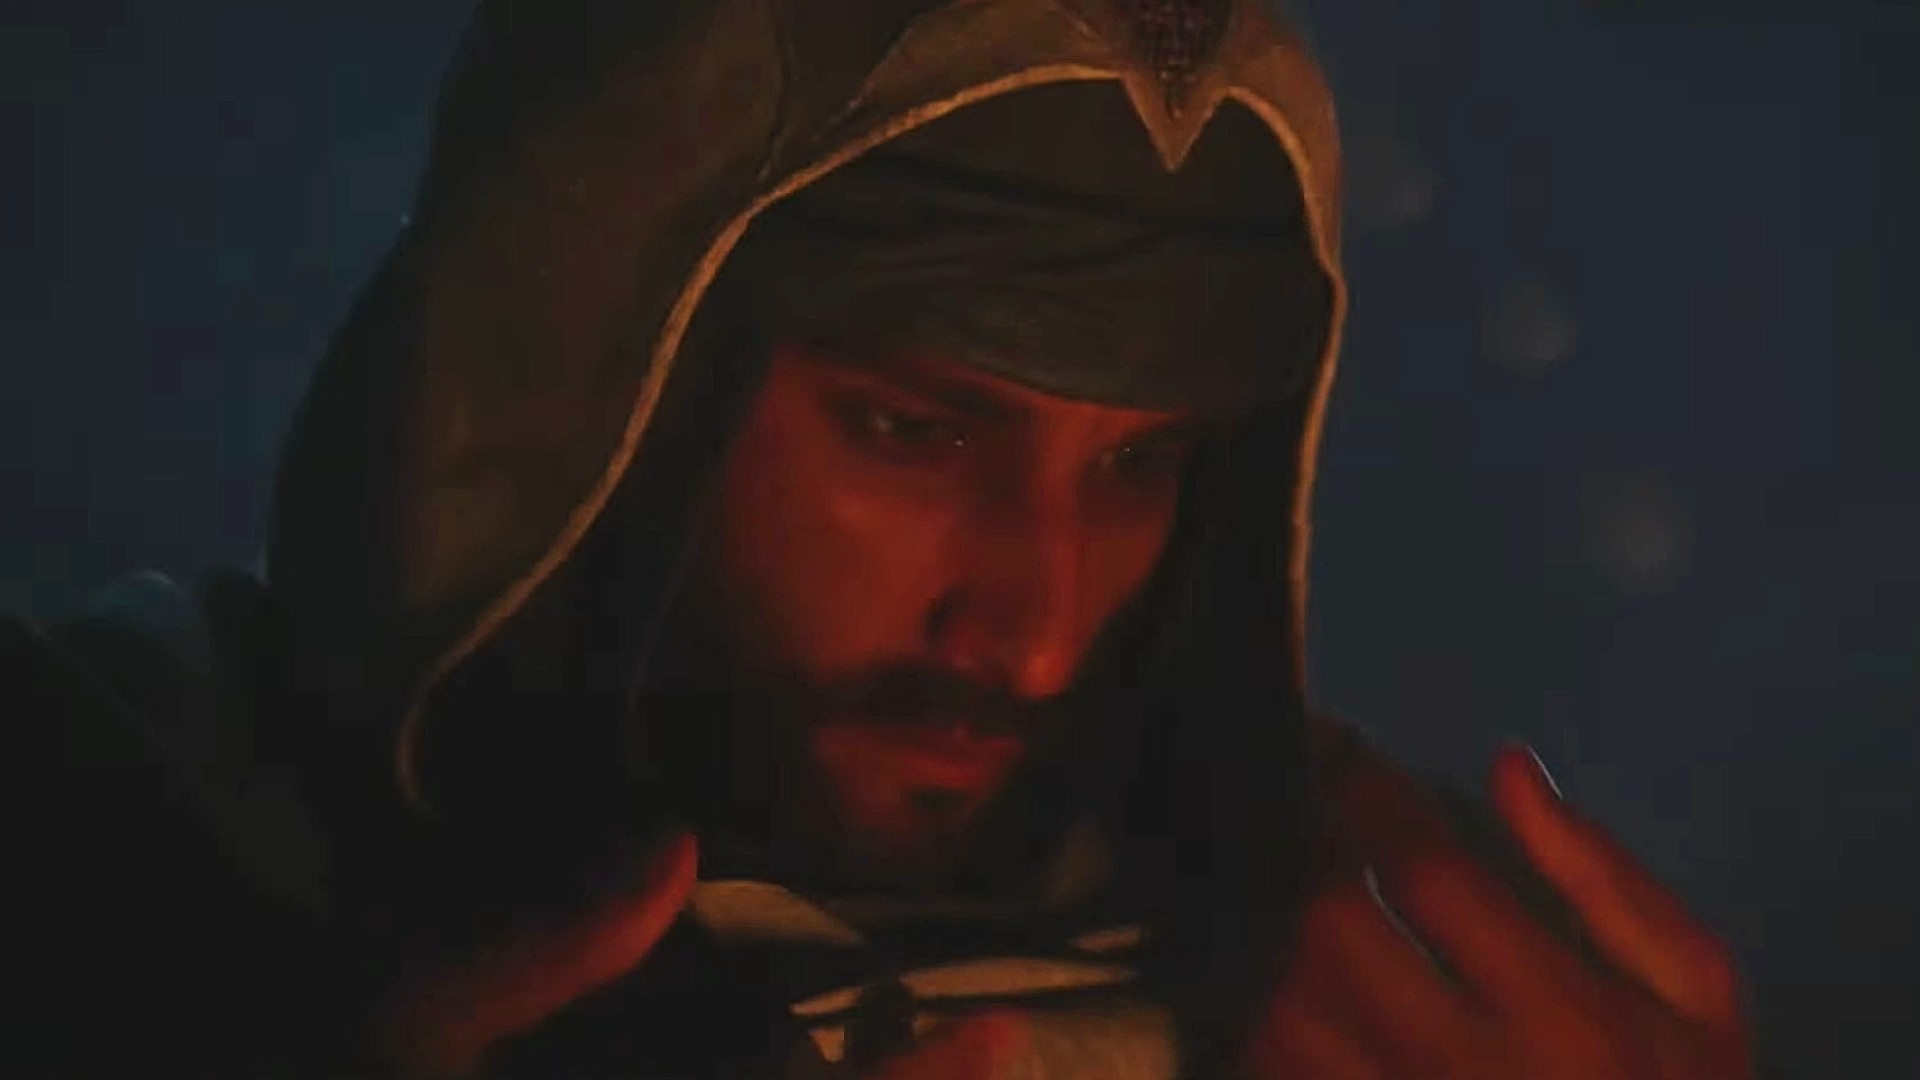 Basim shows up for Assassin's Creed Valhalla DLC